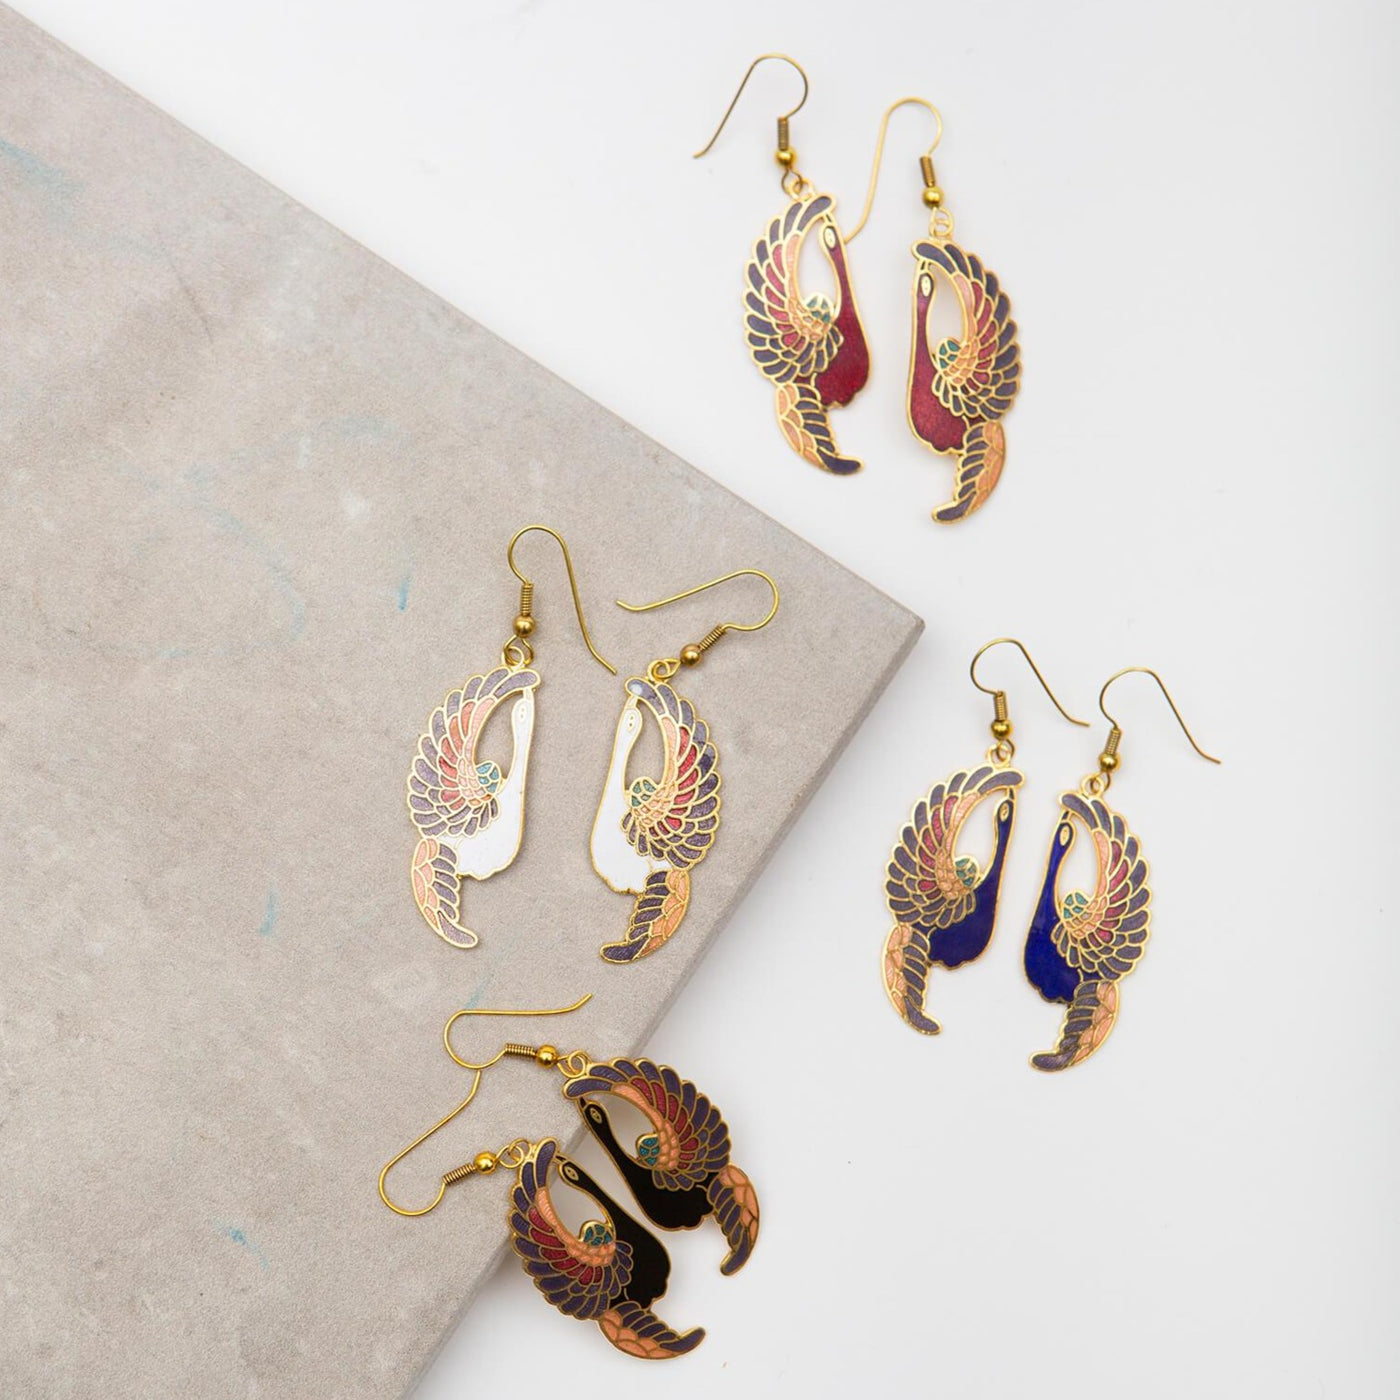 Cloisonné Earrings - Cranes all four colorways laying on a stone.